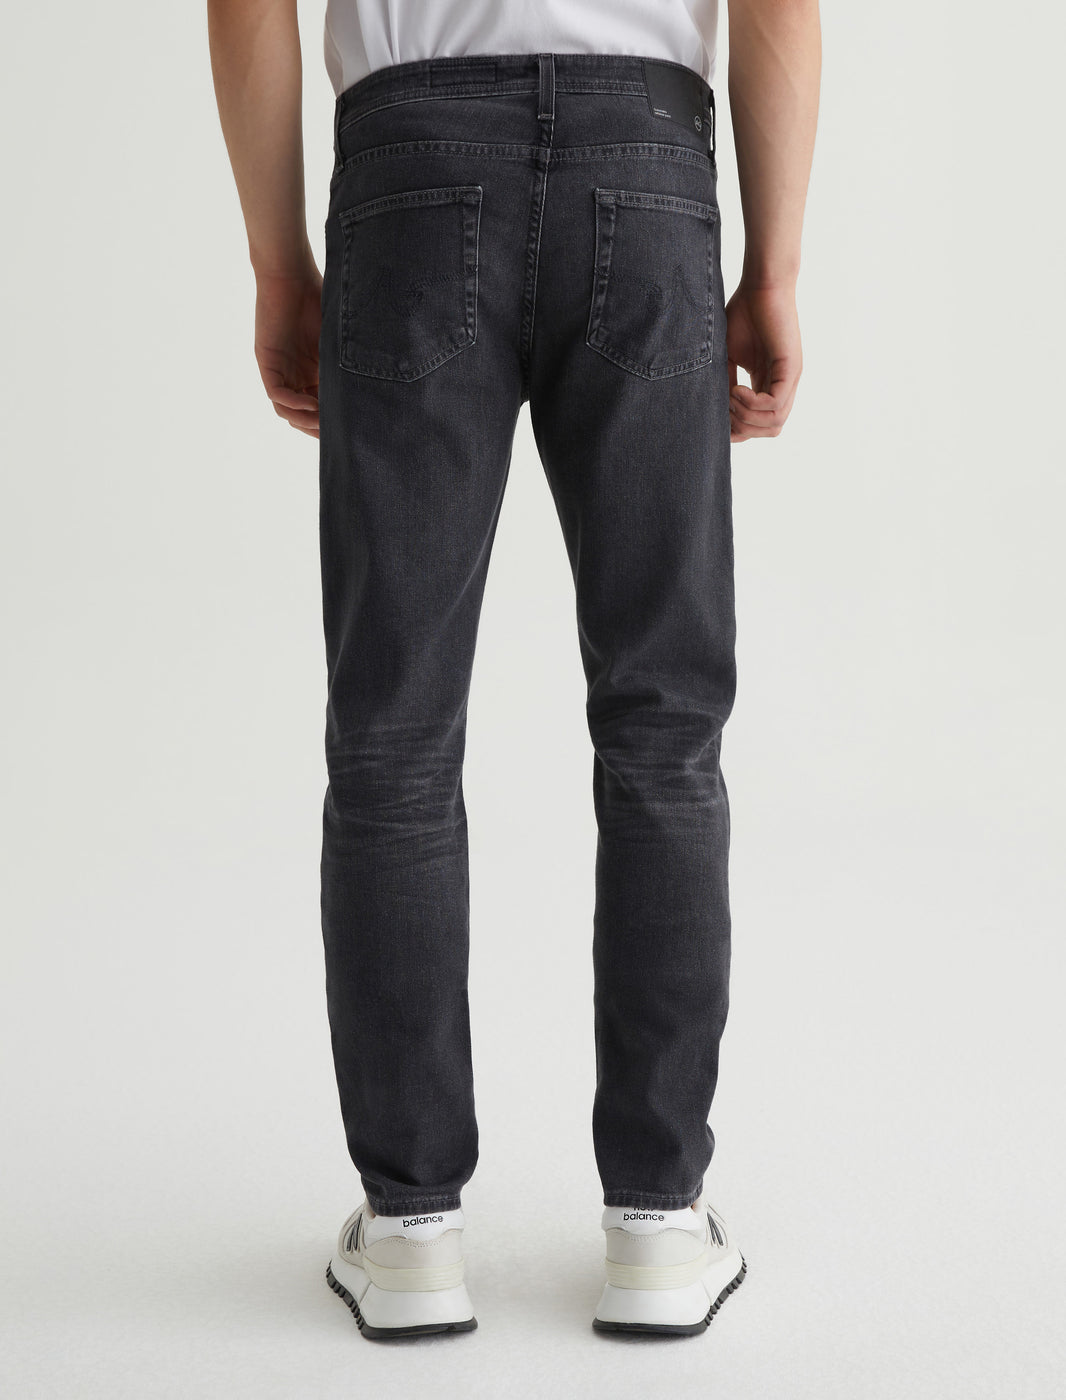 Dylan Slim Fit Jeans Washed Faded Black For Tall Men